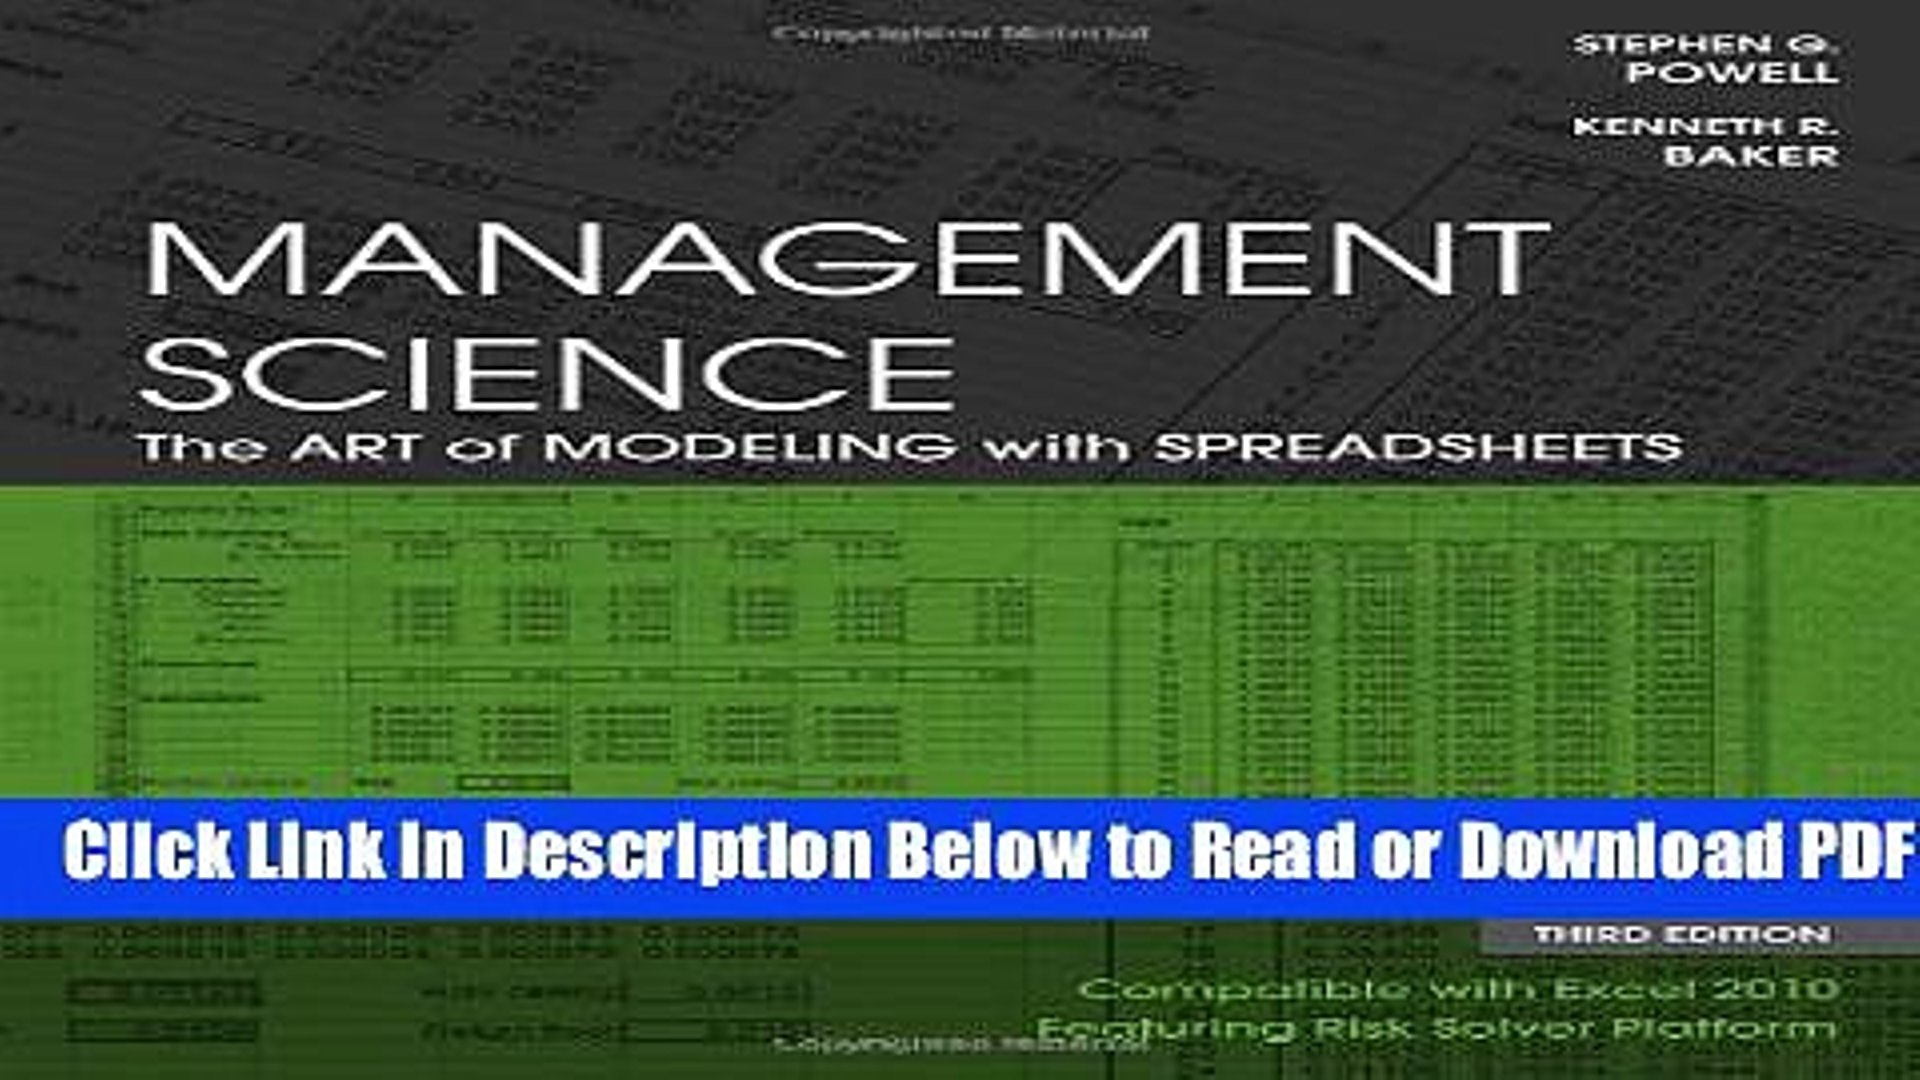 Management Science The Art Of Modeling With Spreadsheets Pdf Intended For Pdf] Management Science: The Art Of Modeling With Spreadsheets